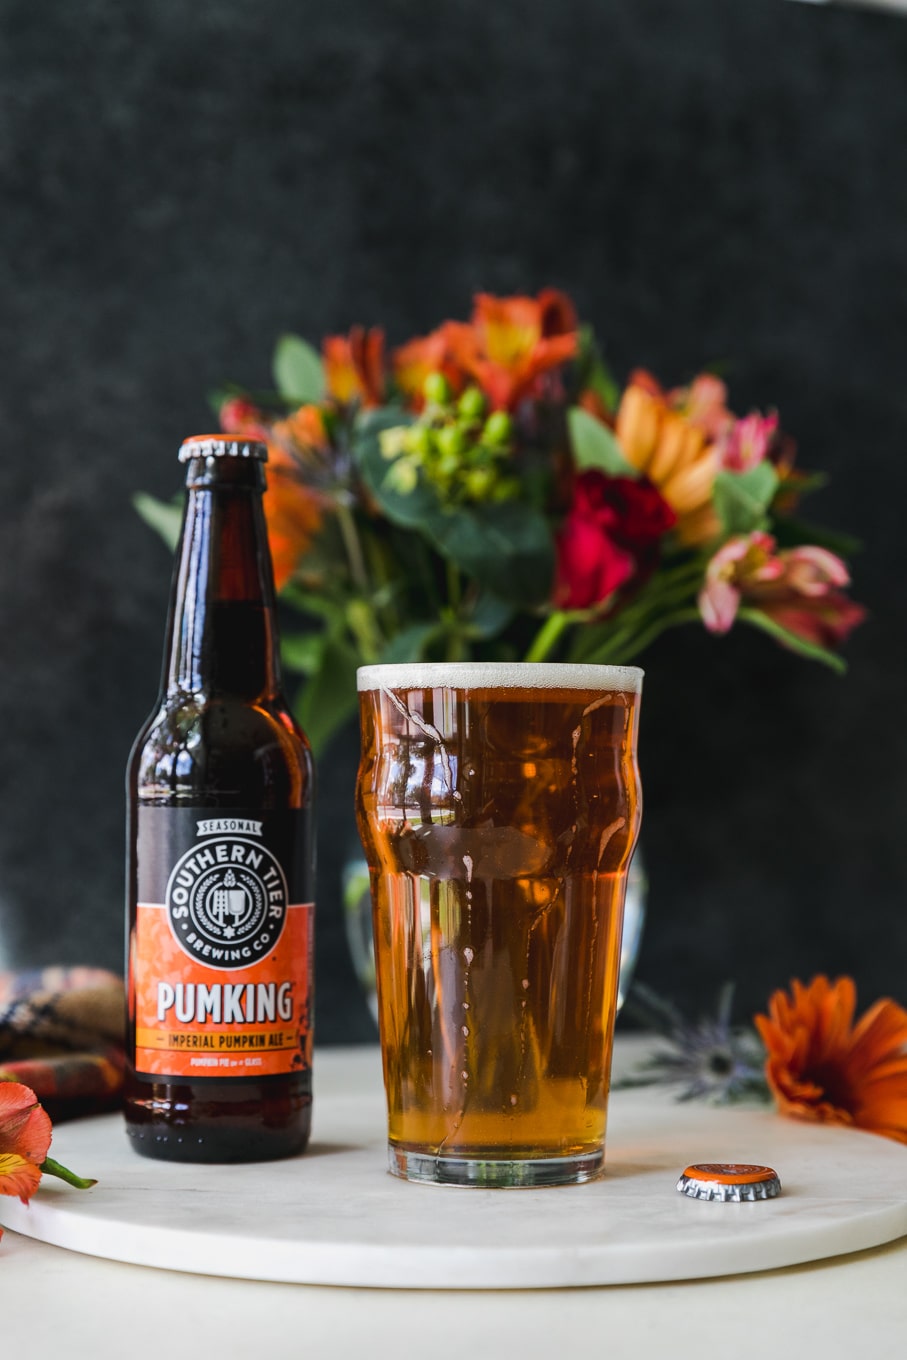 Forward facing shot of a beer glass filled with beer and a beer bottle next to it with a vase of flowers in the background and orange flowers scattered around